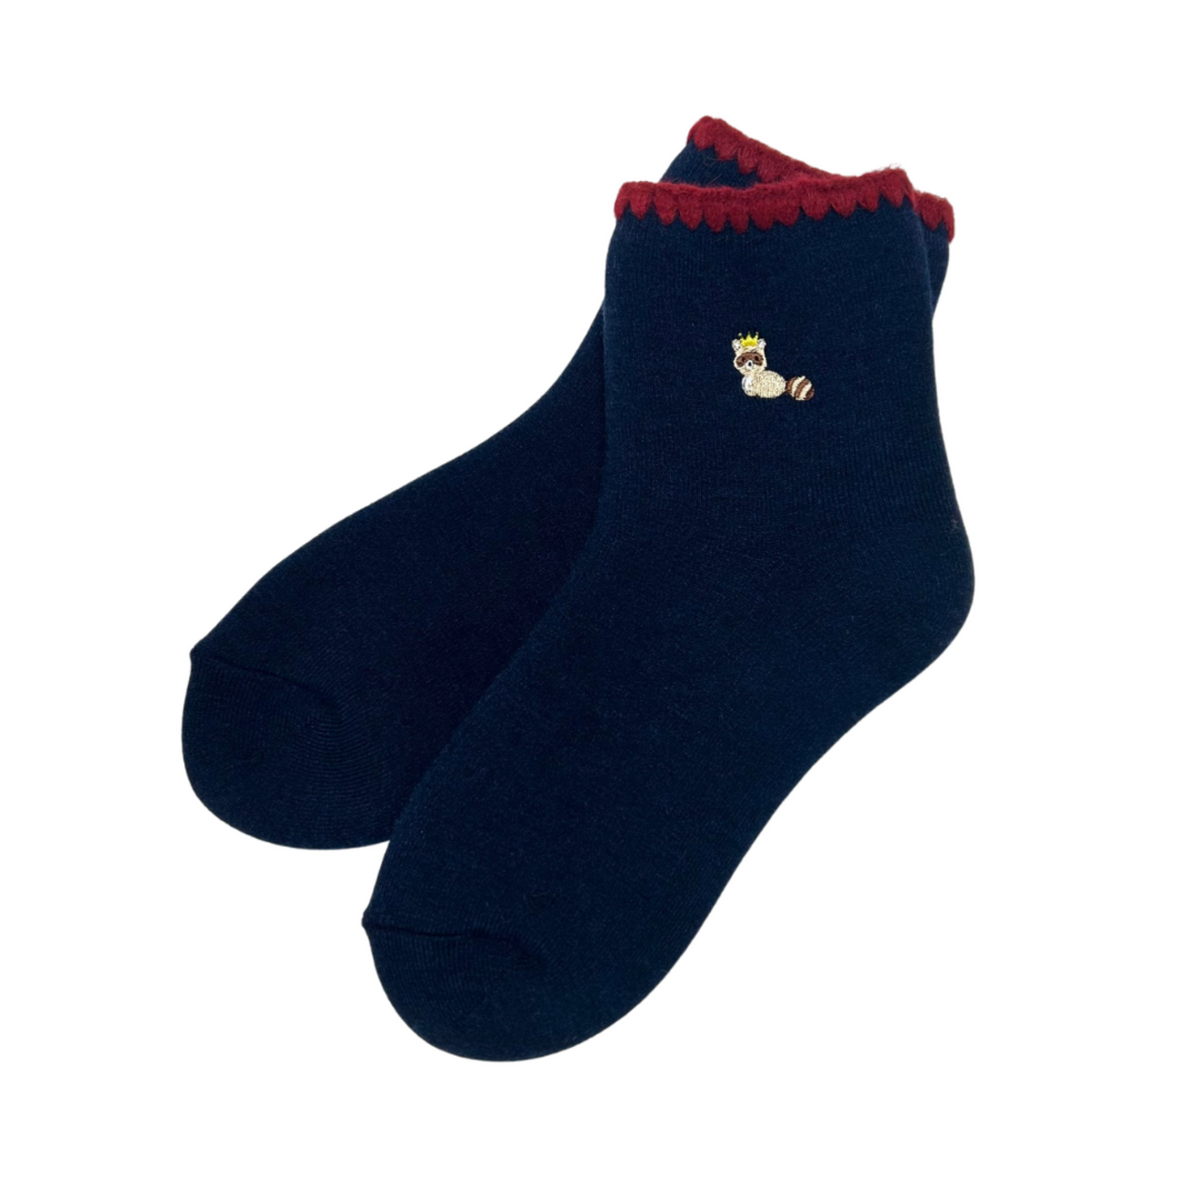 Handcrafted Wool Raccoon Embroidery Crew Socks | Medium | Handcrafted Panda Embroidery Wool Crew Sock, Medium, Navy and Gray, signature handcrafted slipper socks, Crew socks with cute Racoon embroidery, Handcrafted with love, Panda, Racoon, hand-knitting, gifting, 33% wool